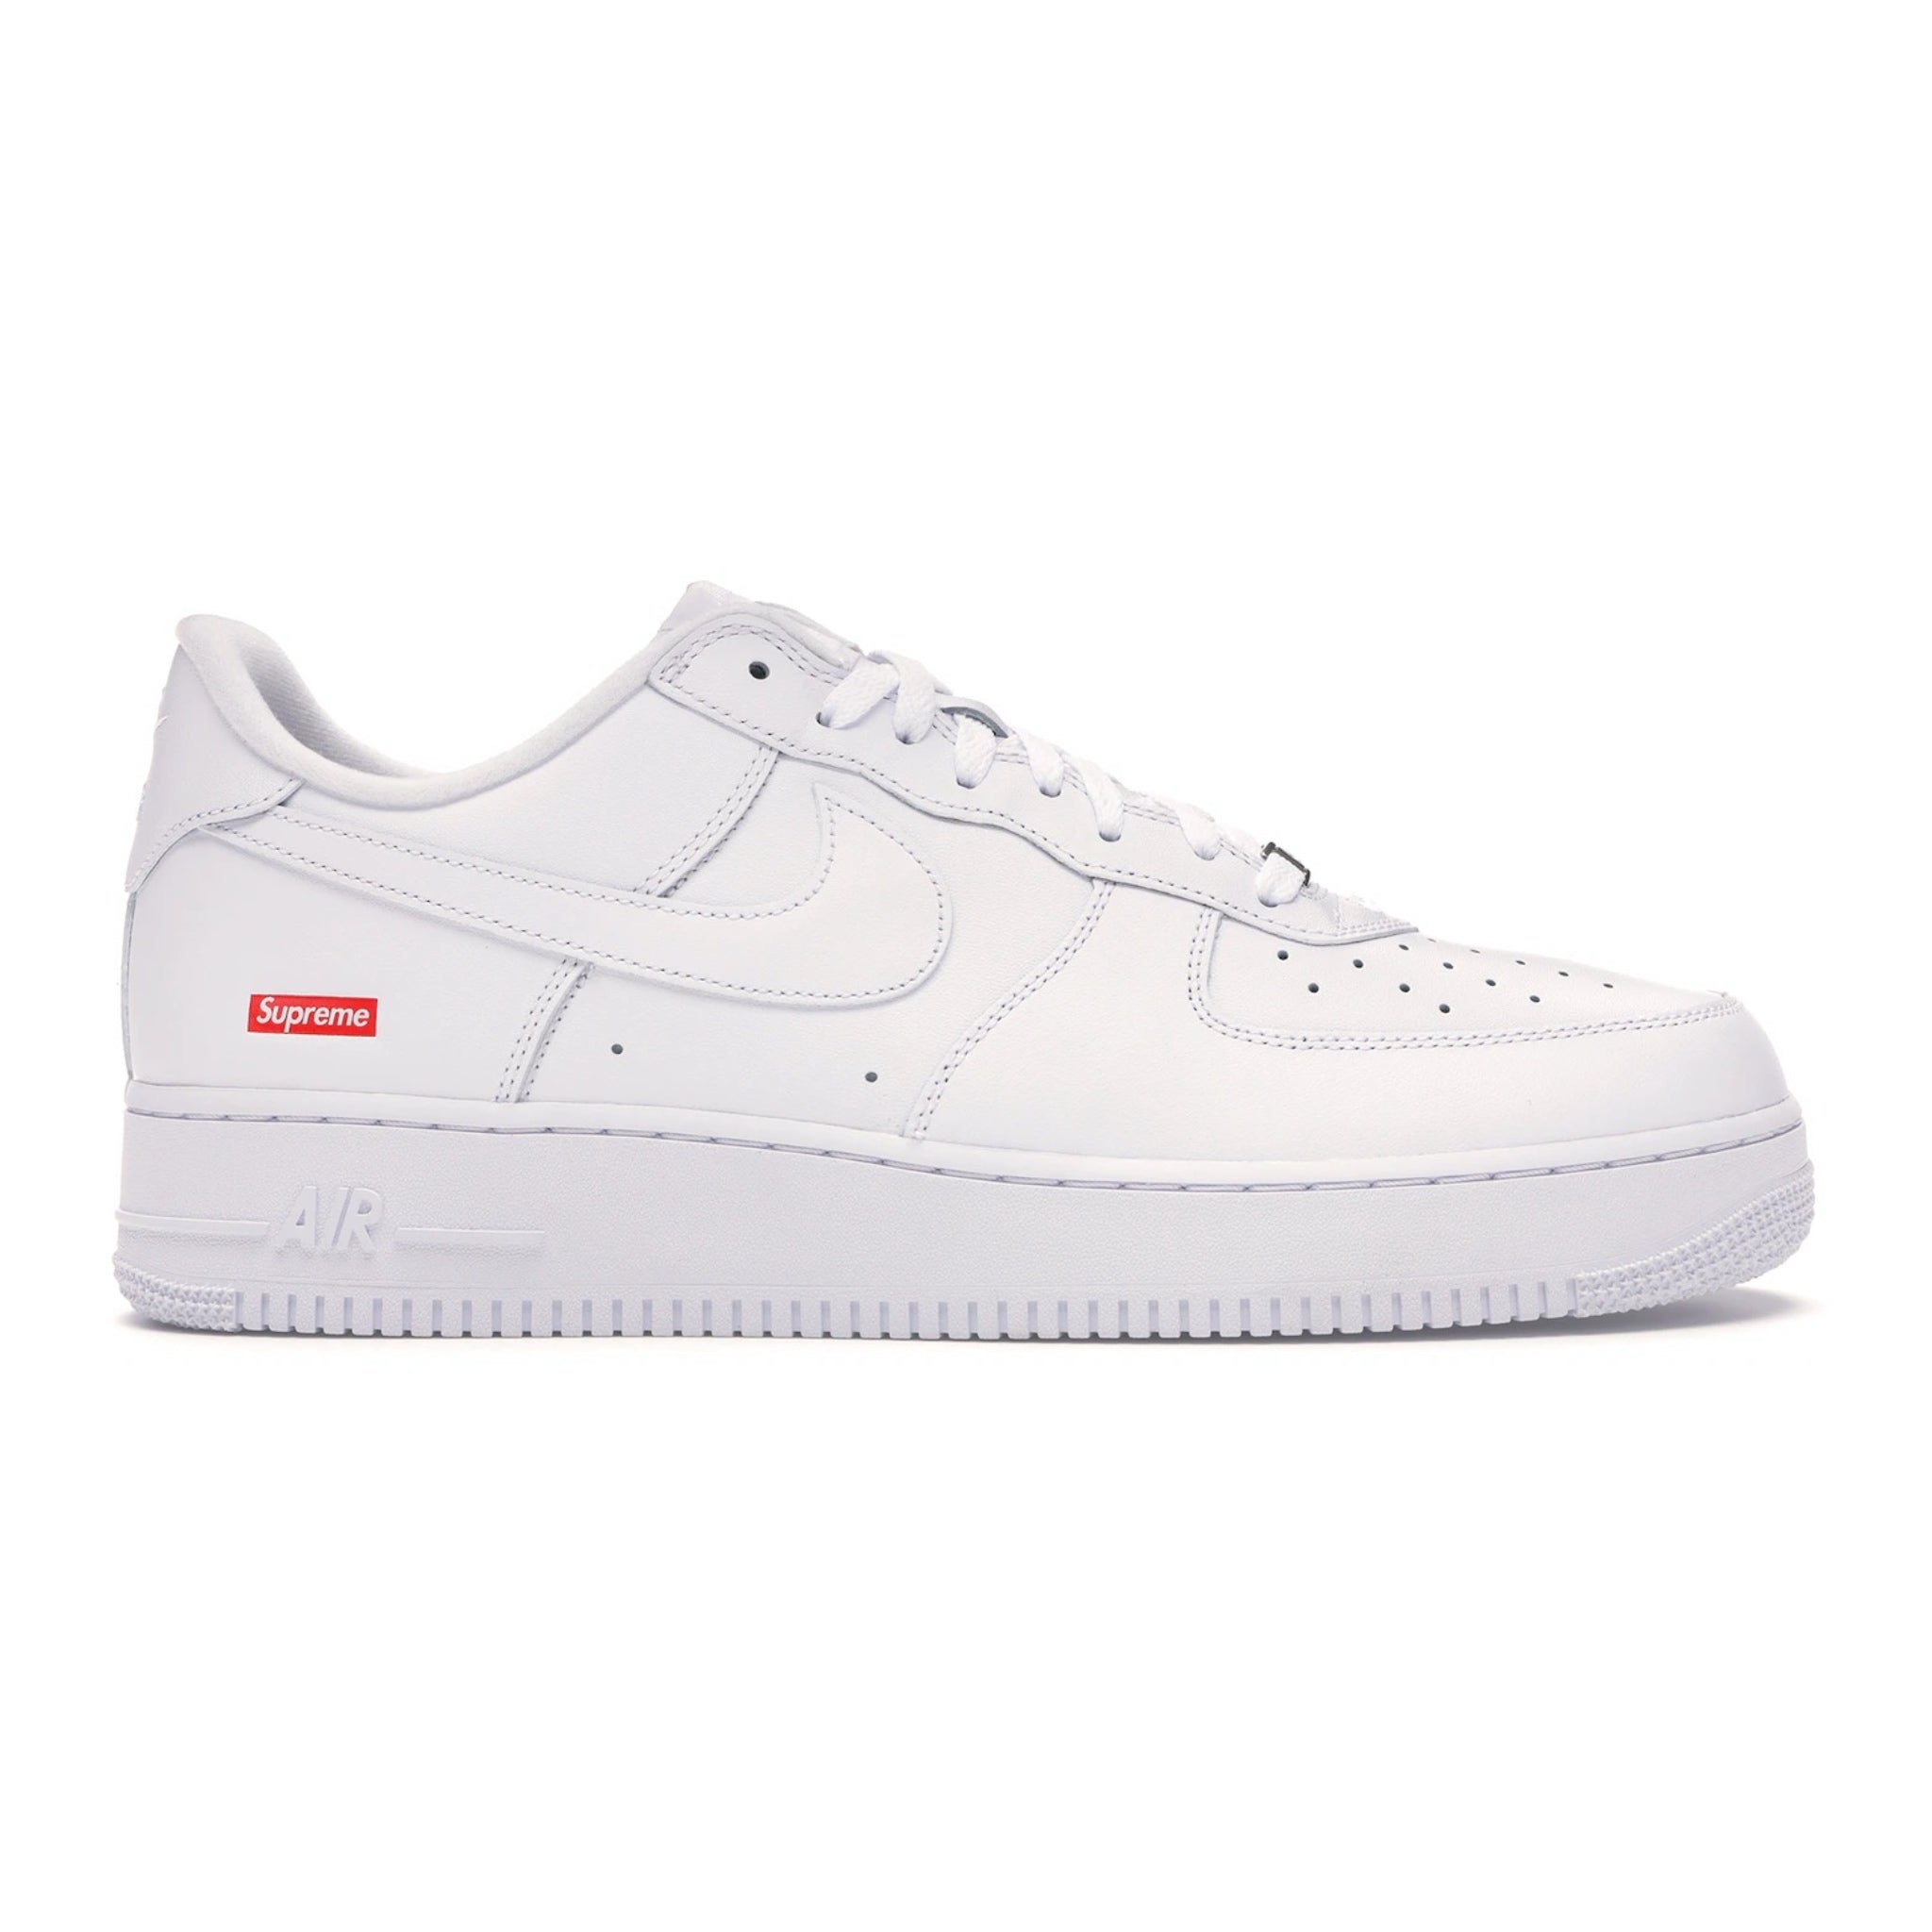 NIKE AIR FORCE 1 LOW SUPREME WHITE | Contrast Clothing South Coast